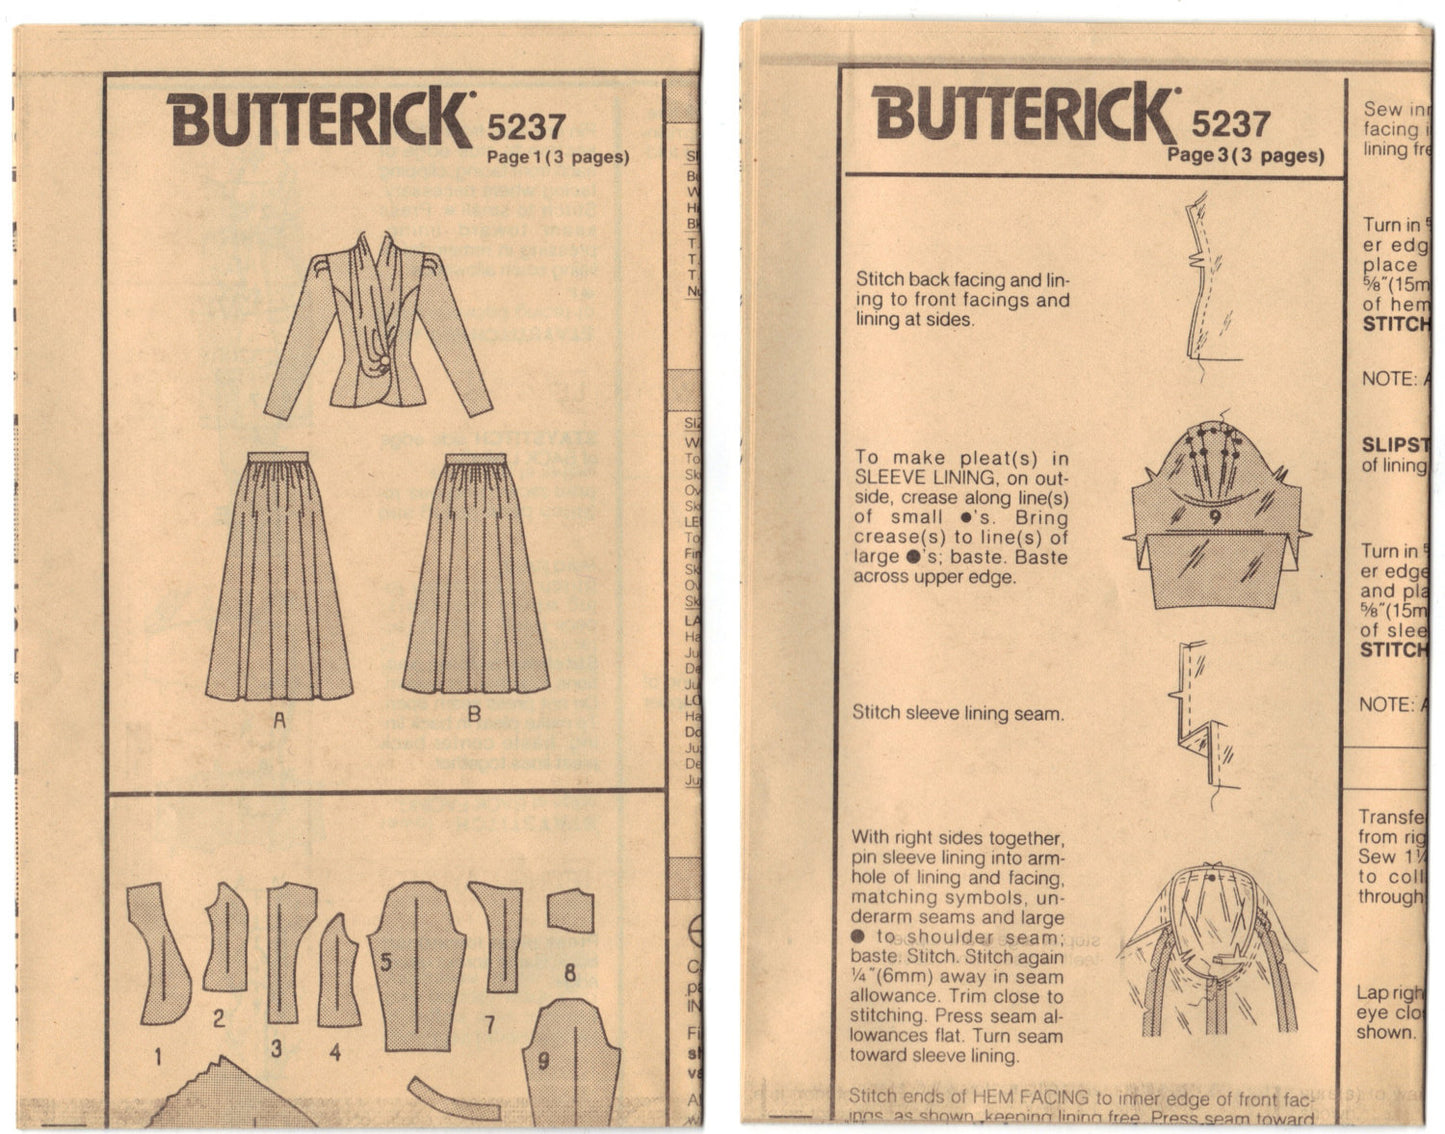 Butterick 5237 Pattern Vintage Misses Top With Softly Tucked Collar and Skirt